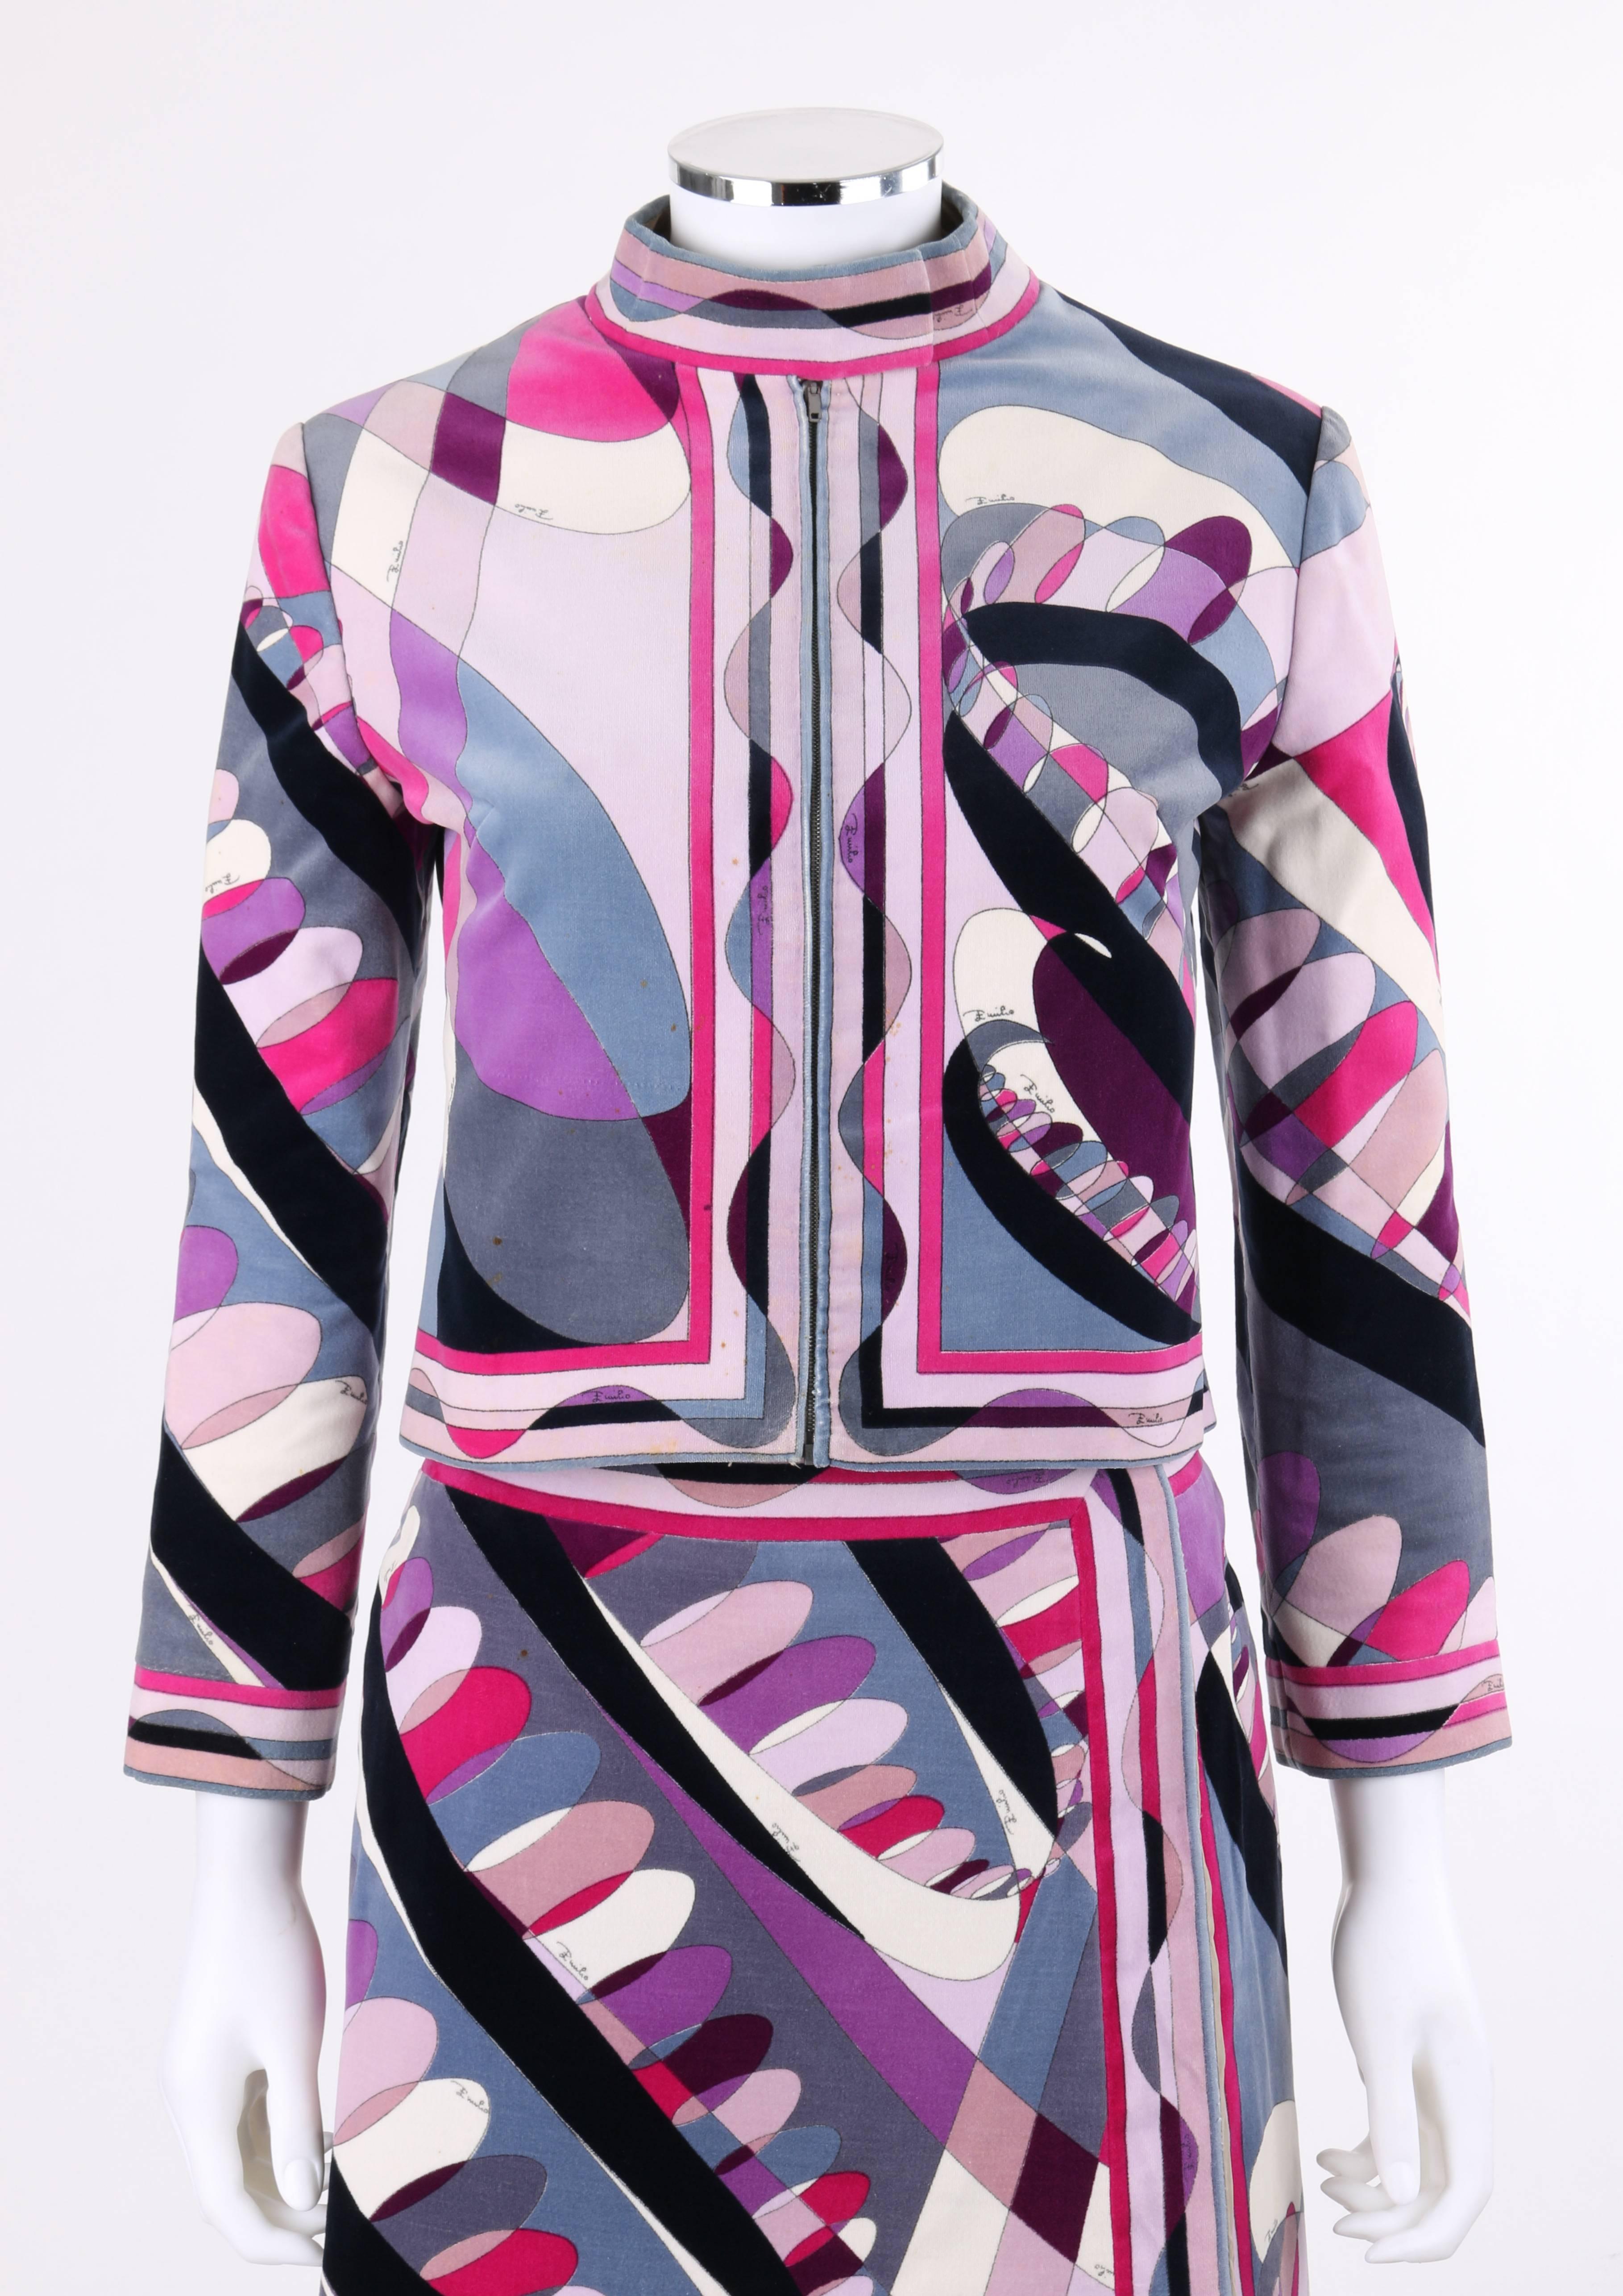 Vintage Emilio Pucci c.1960's two-piece purple signature op art print velvet jacket and skirt suit set exclusively for Saks Fifth Avenue. Multicolor op art print cotton velvet in shades of purple, fuchsia, gray, black, and white with striped border